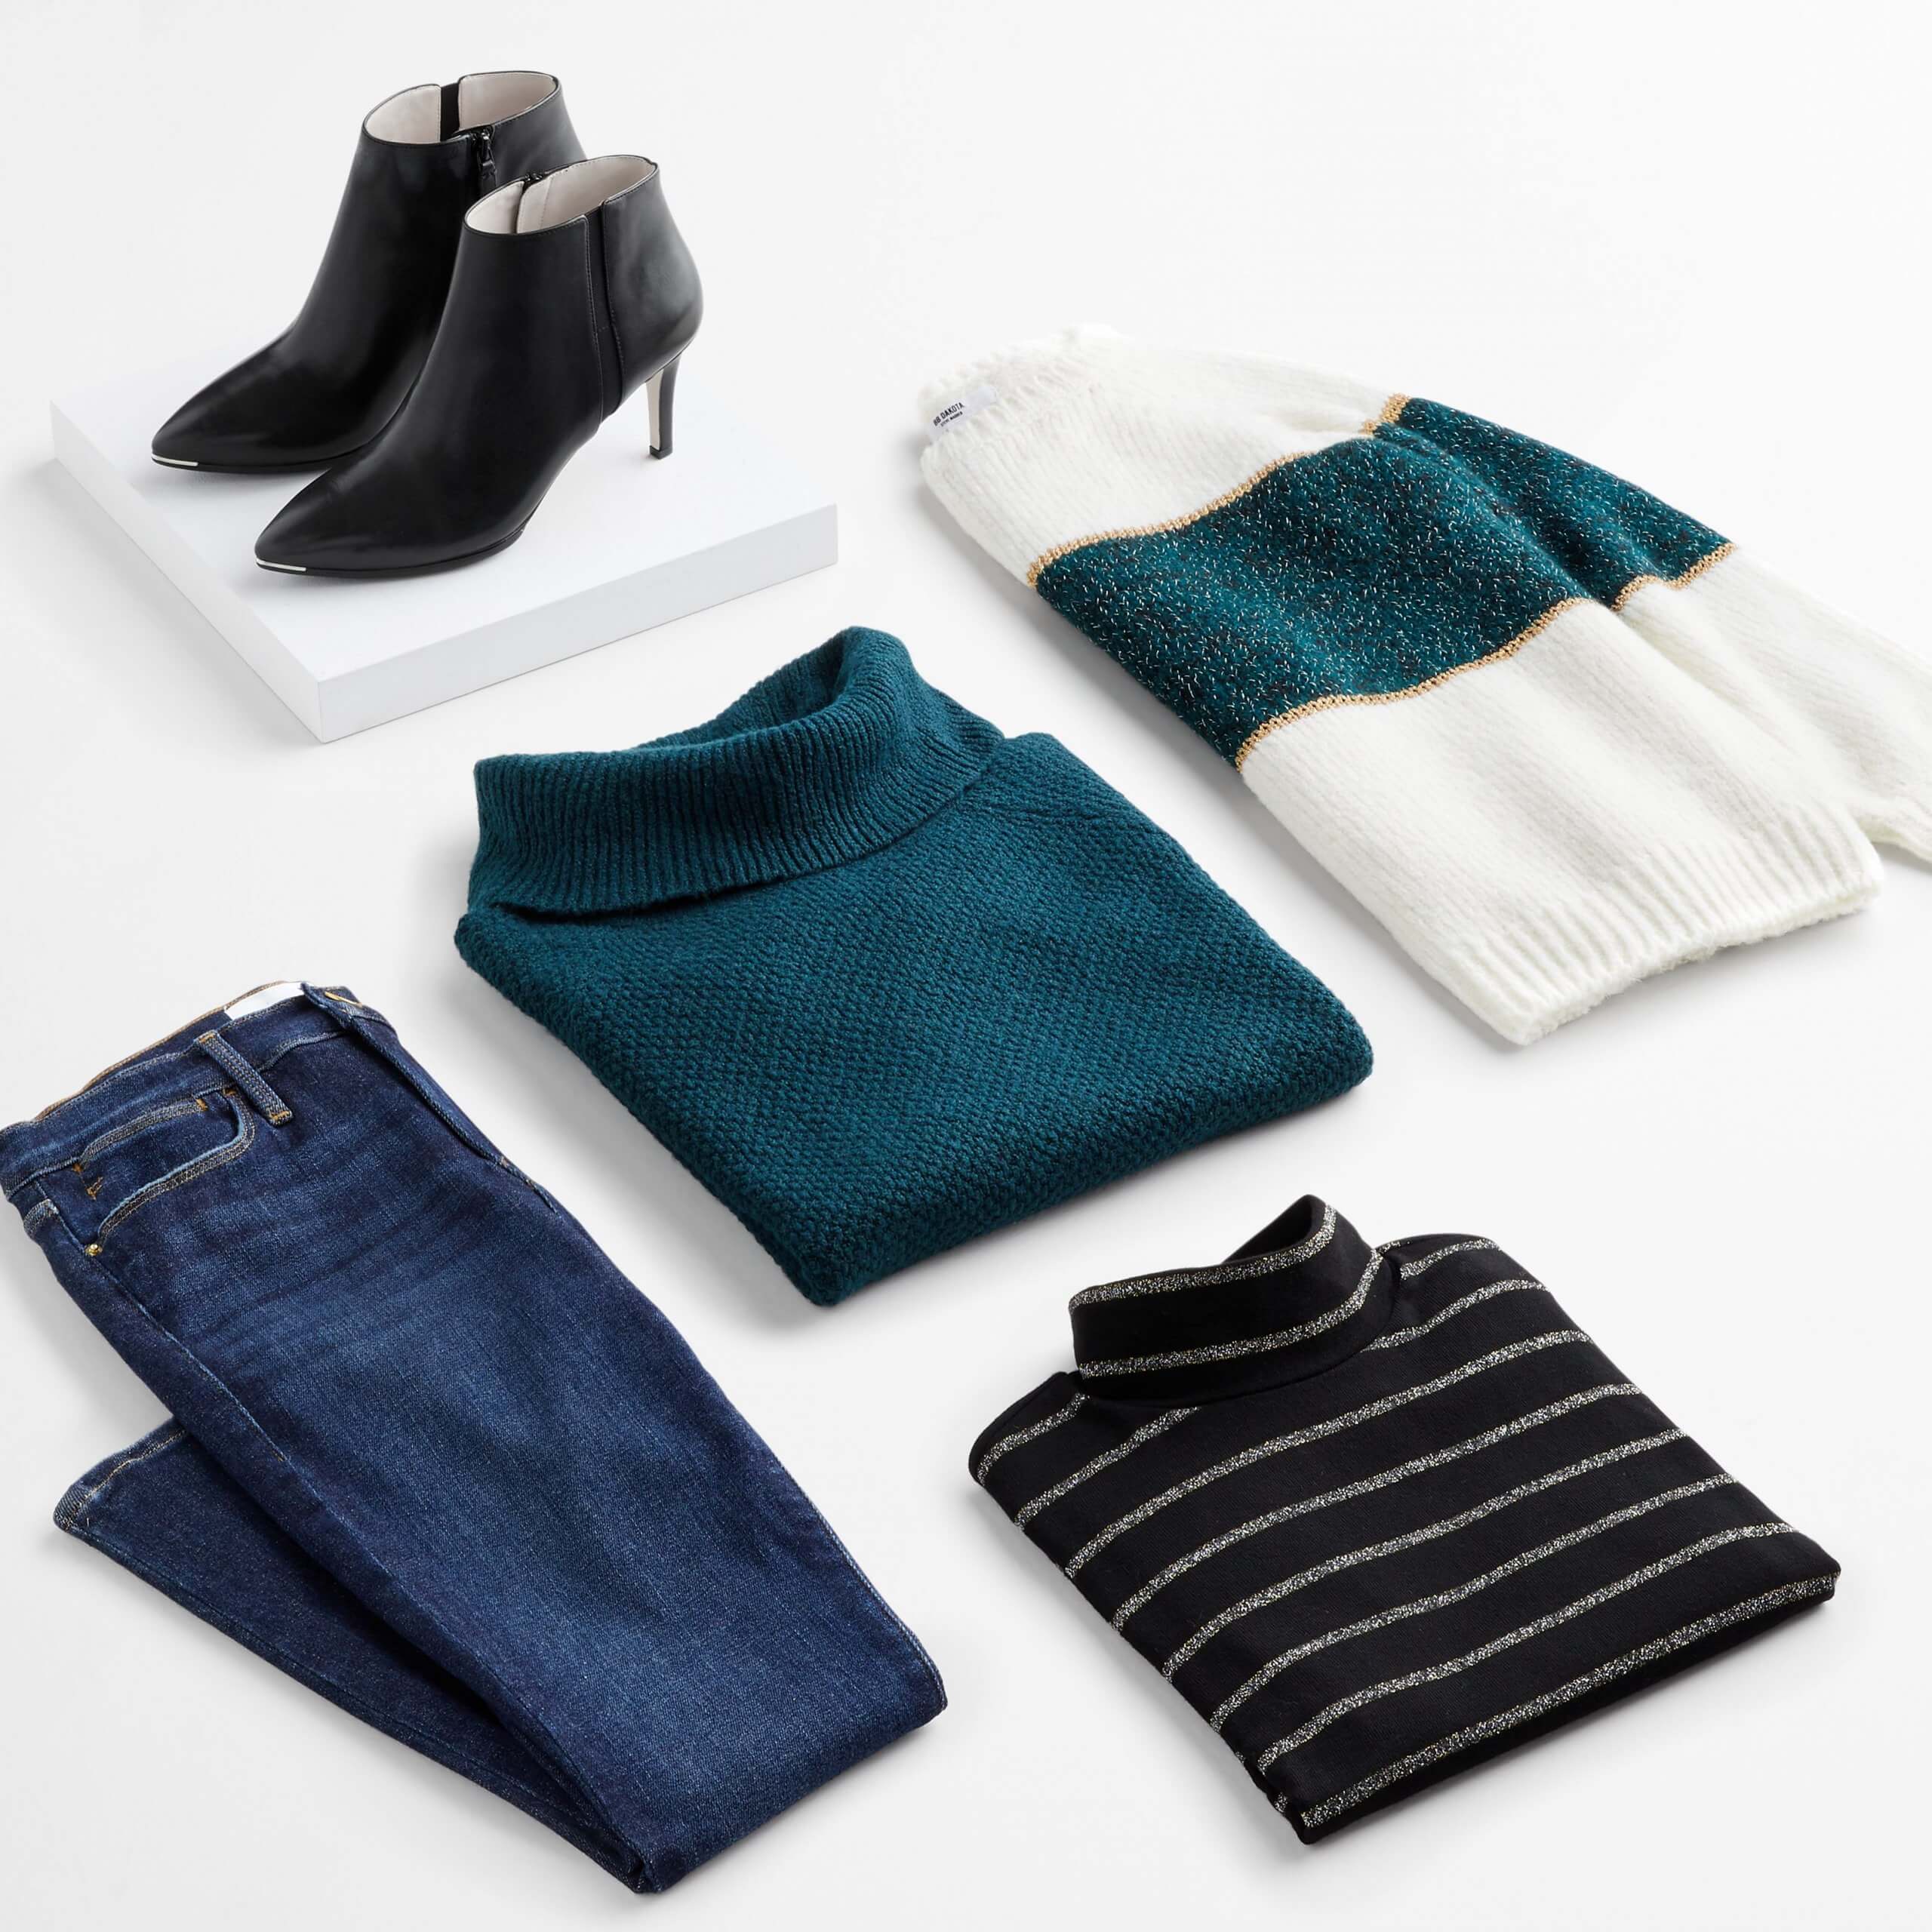 Stitch Fix Women's outfit laydown featuring skinny jeans, teal green turtleneck sweater, white and green pullover, black striped turtleneck, and black heeled booties on a white box.